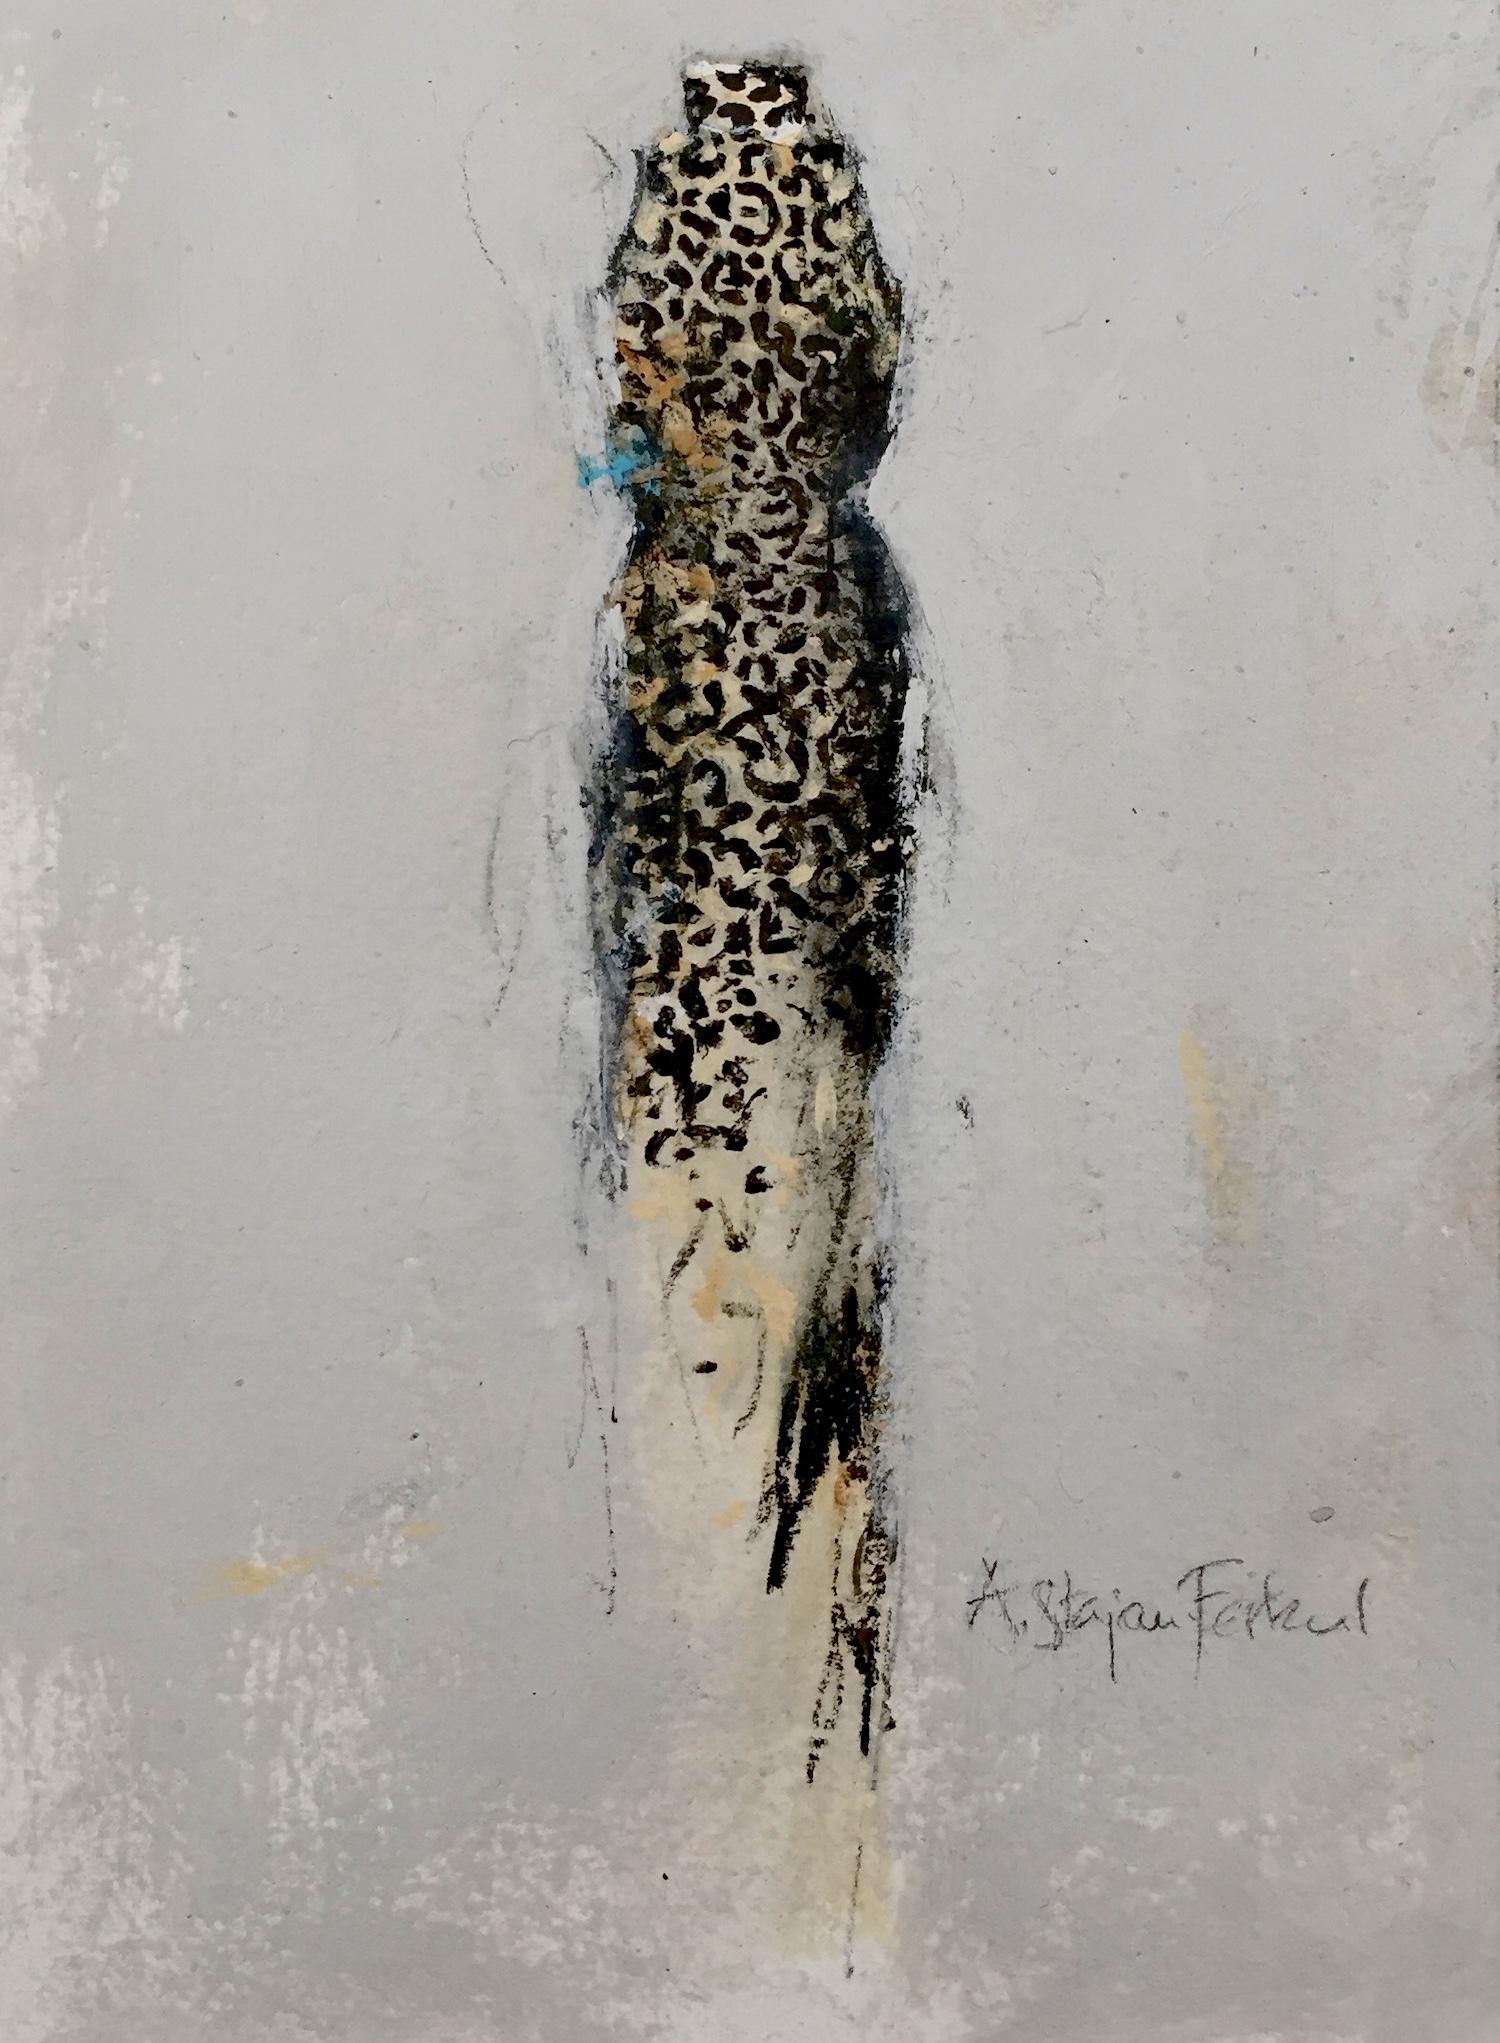 The Dressing Room 4, 5"x7", Artwork On Paper, Leopard Print Dress Painting